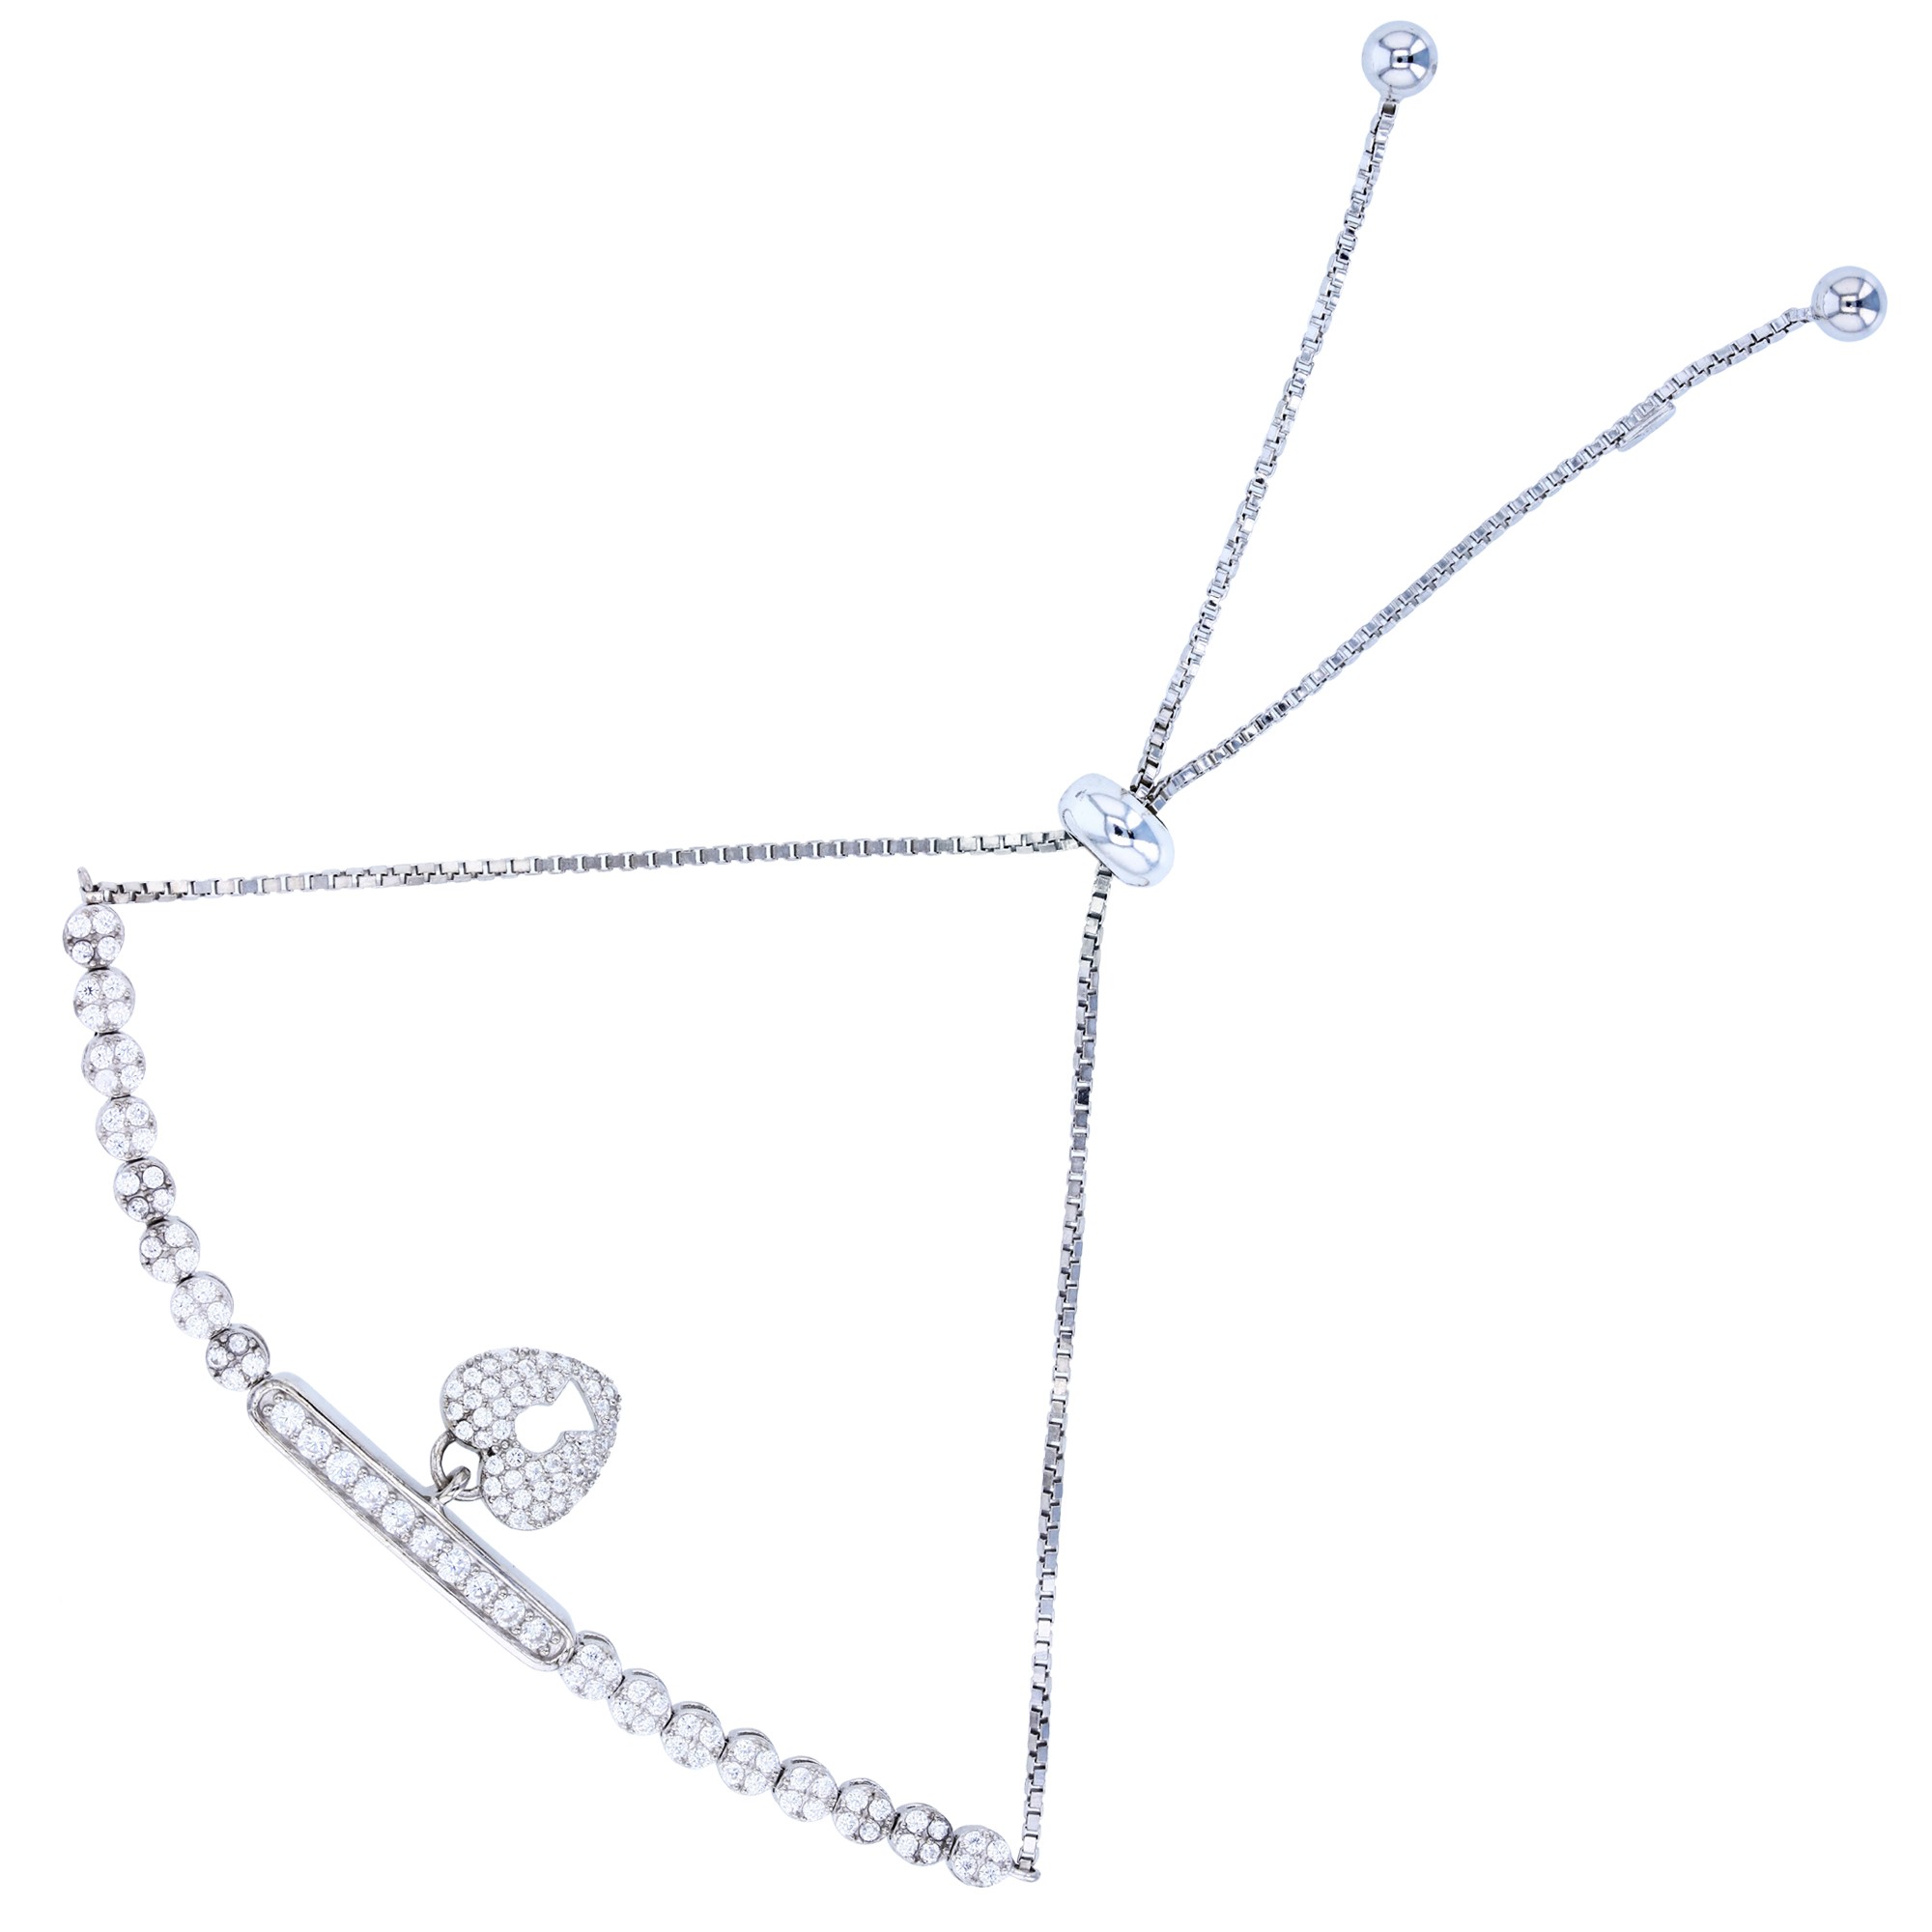 Sterling Silver Rhodium Plated Adjustable Bolo Bracelet Bar & Heart Design With Cubic Zirconia